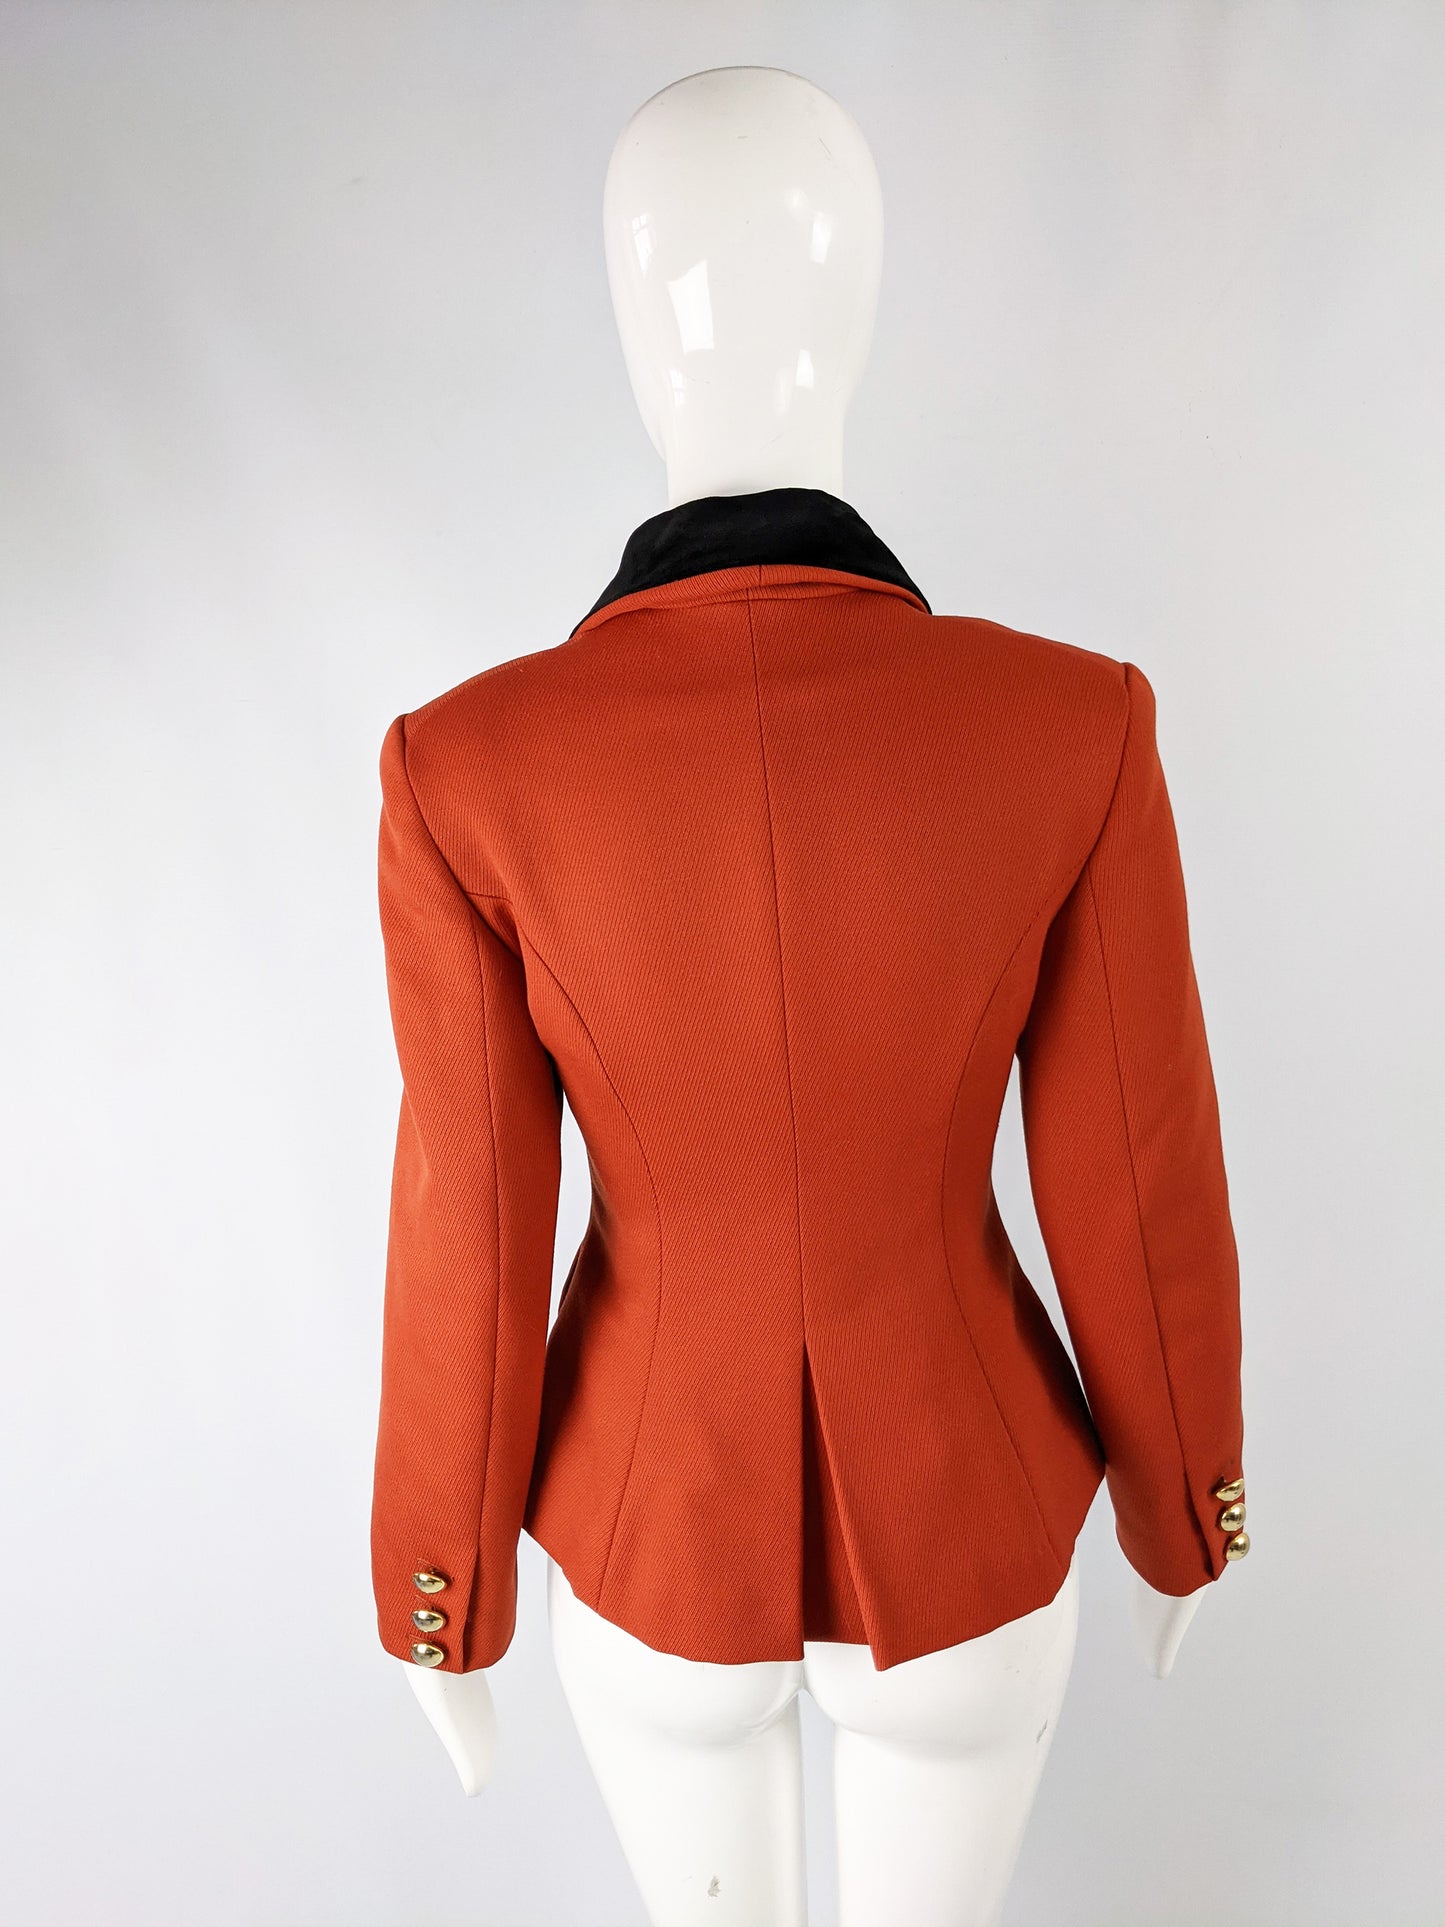 Womens Vintage Hunting Style Tailored Jacket, 1980s